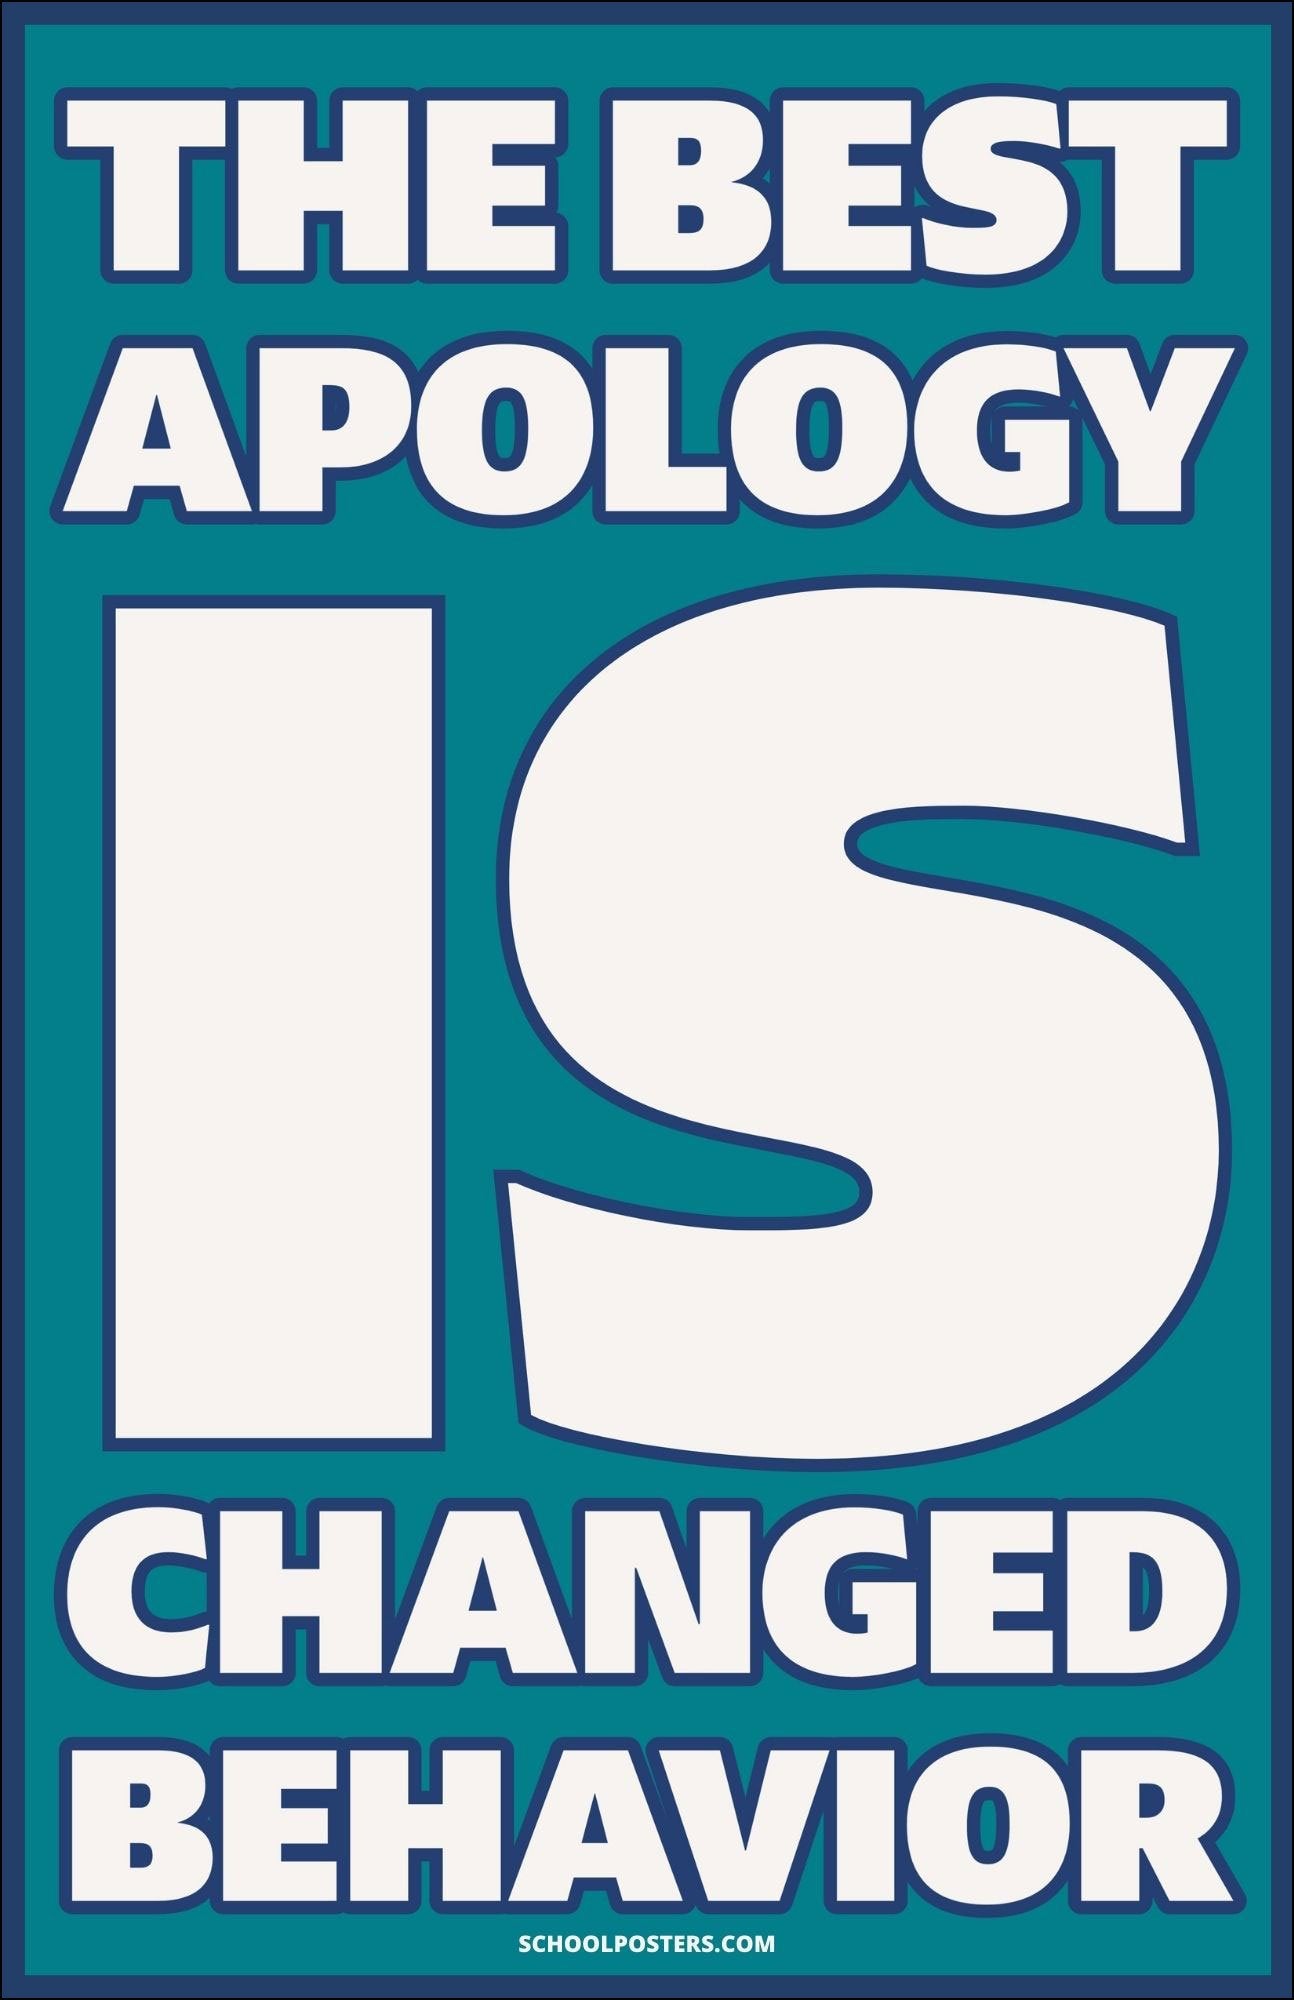 The Best Apology Is Changed Behavior Poster